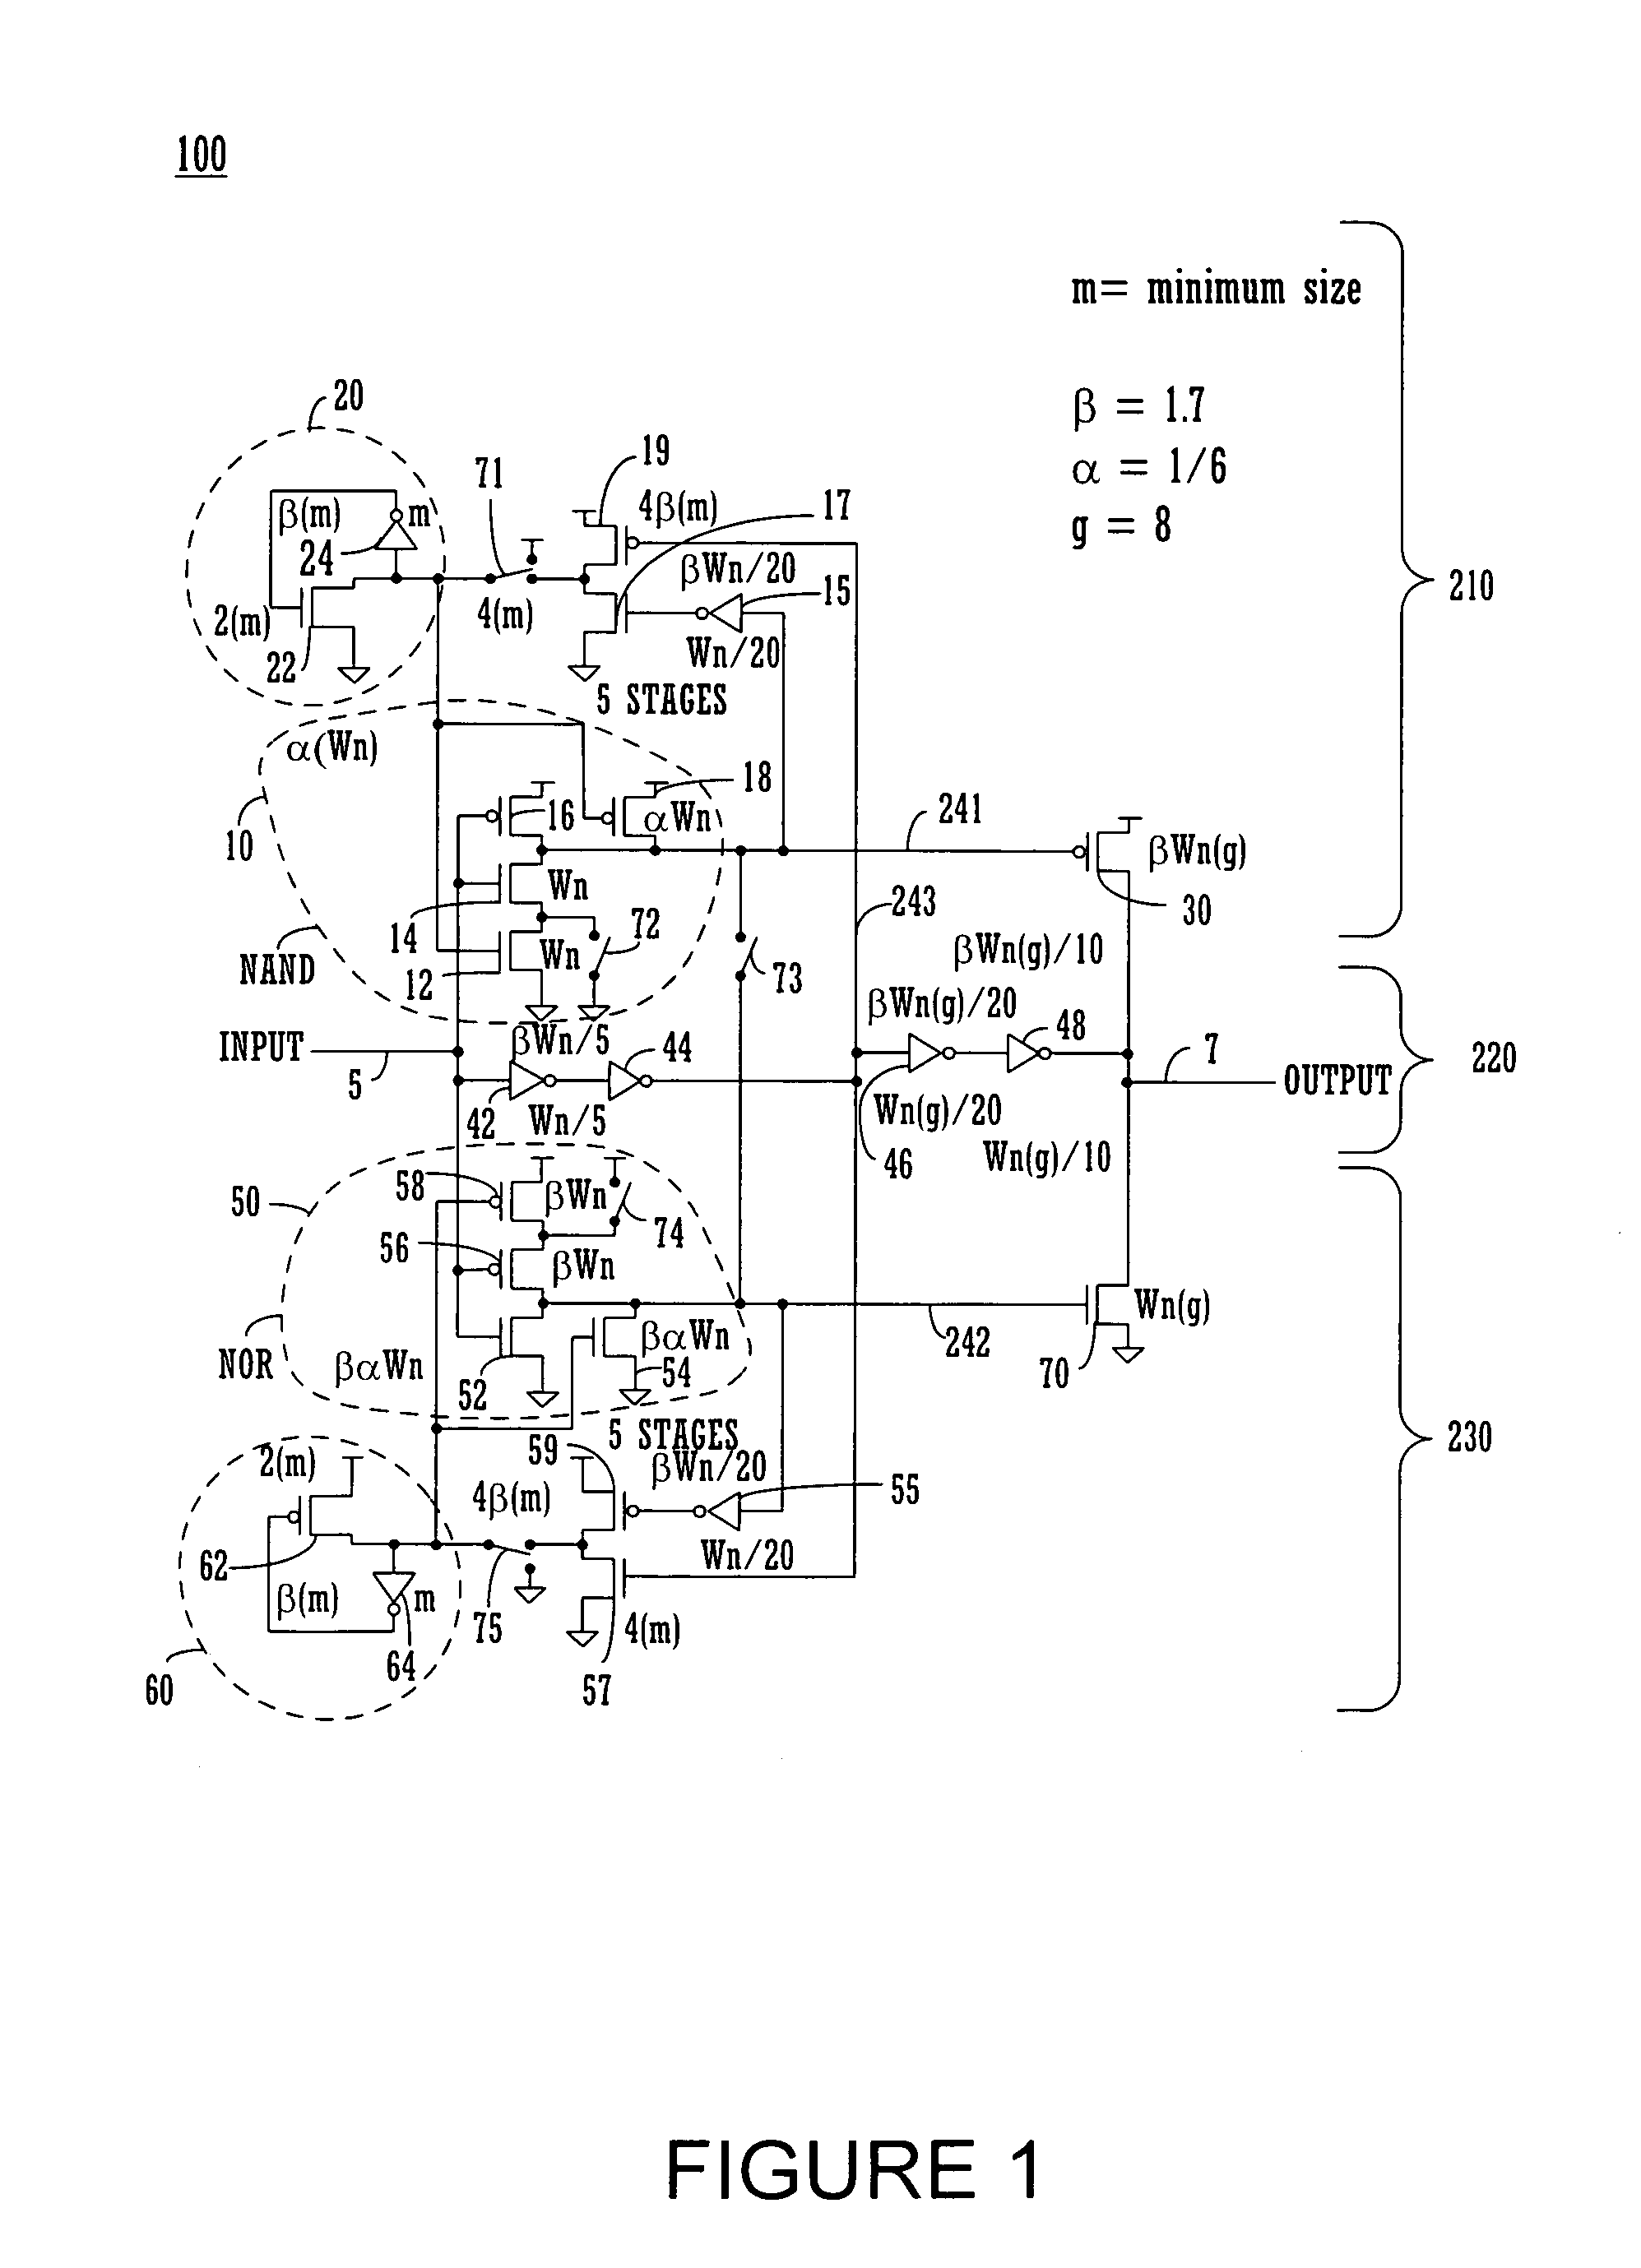 Repeater circuit with high performance repeater mode and normal repeater mode